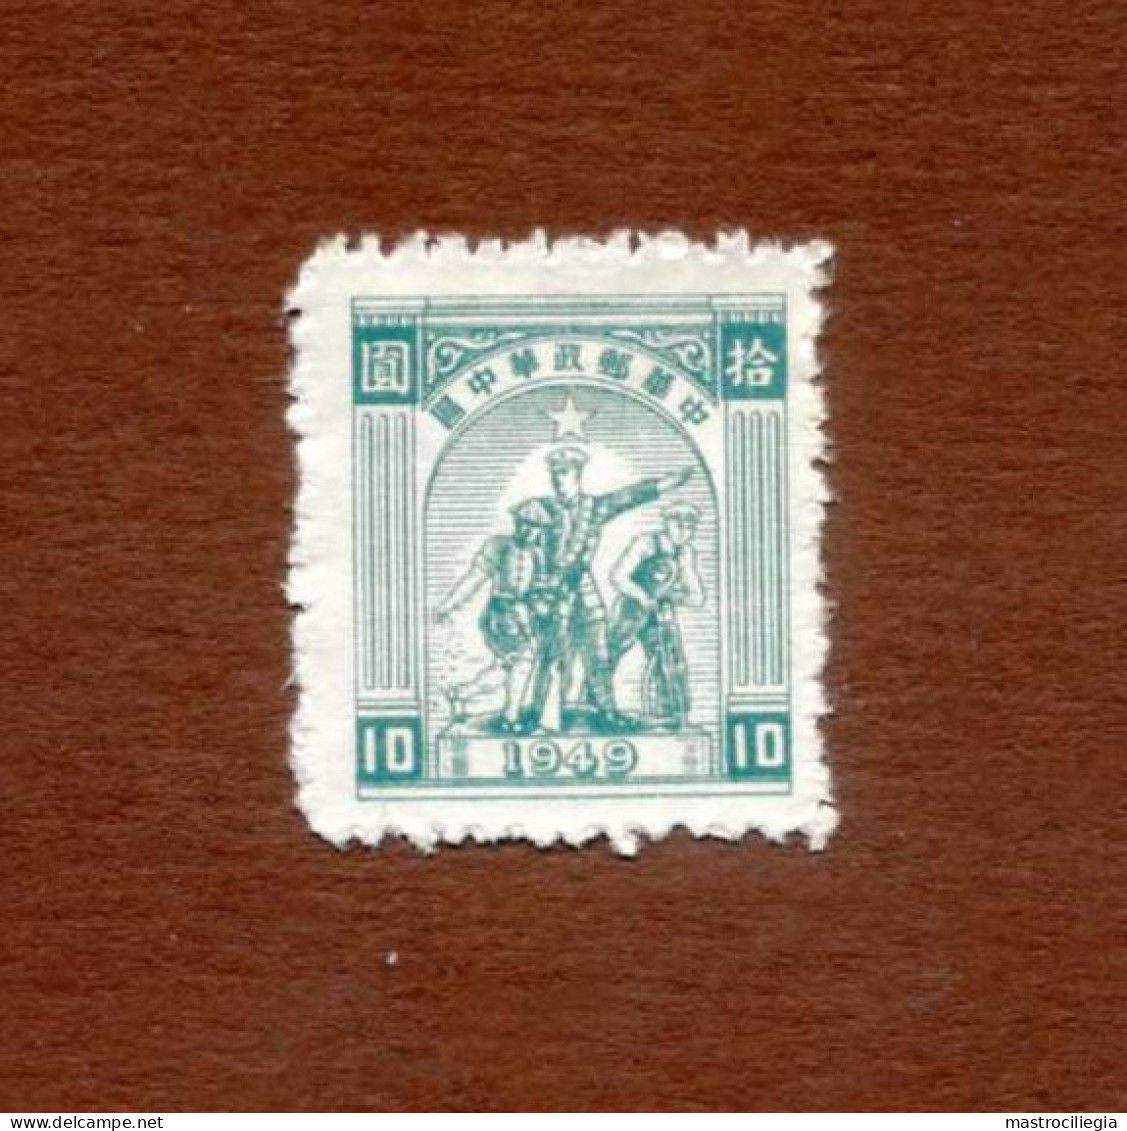 CHINA  CENTRAL  10$ - Chine Centrale 1948-49